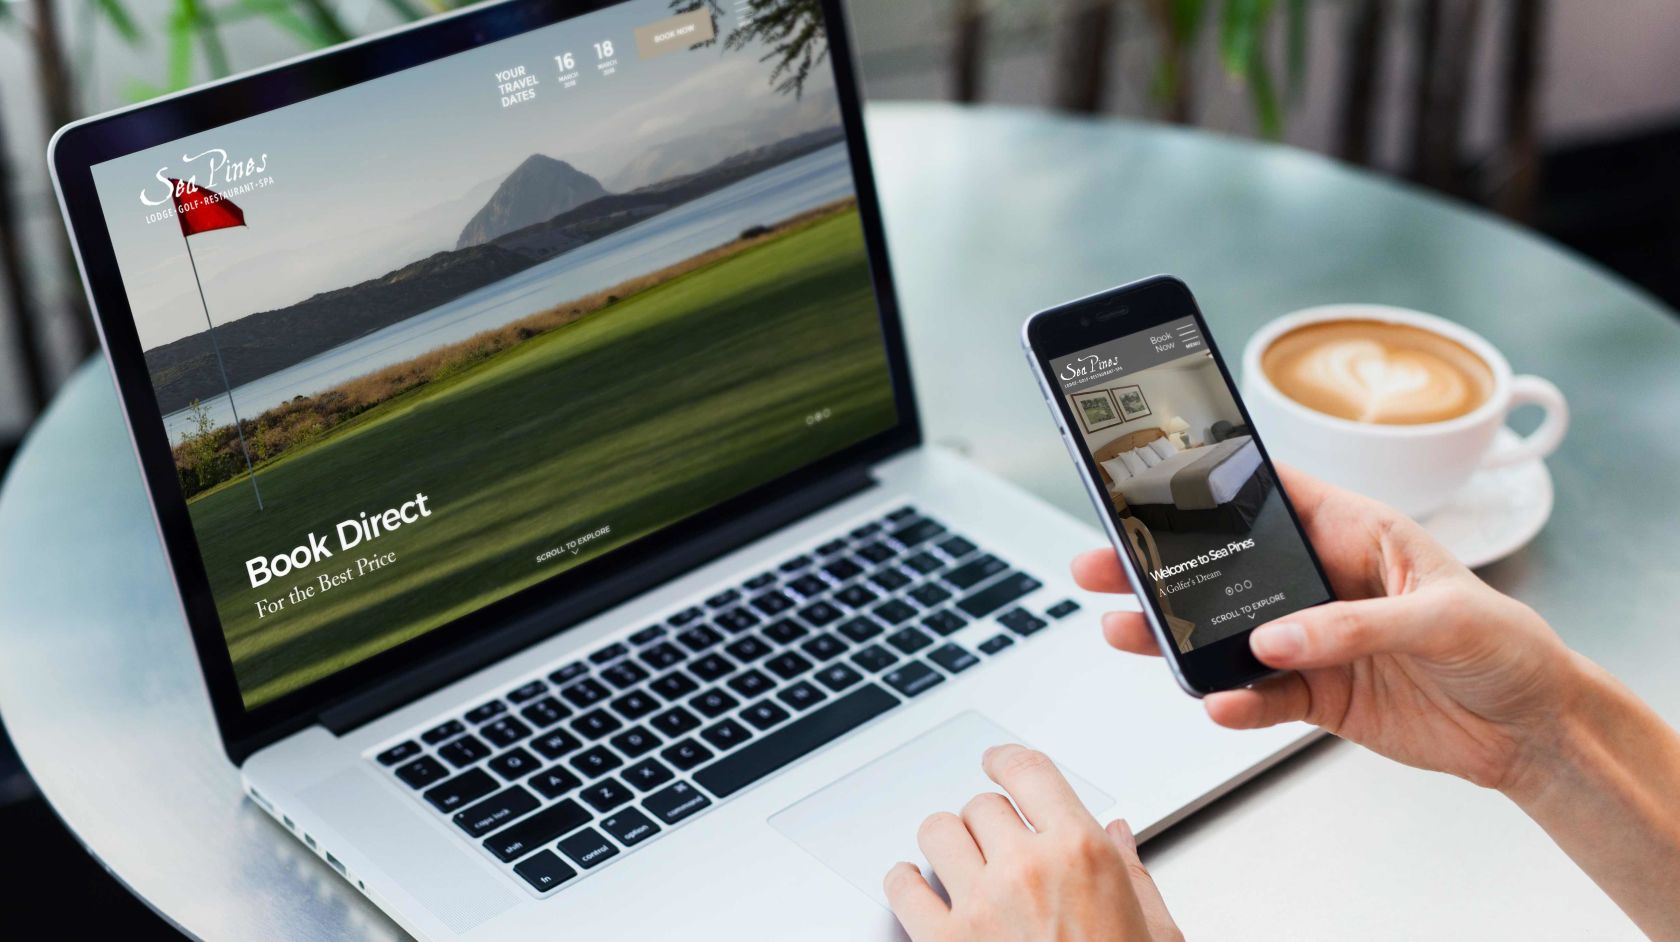 Newly designed Sea Pines Golf Resort website accessible via desktop and mobile devices